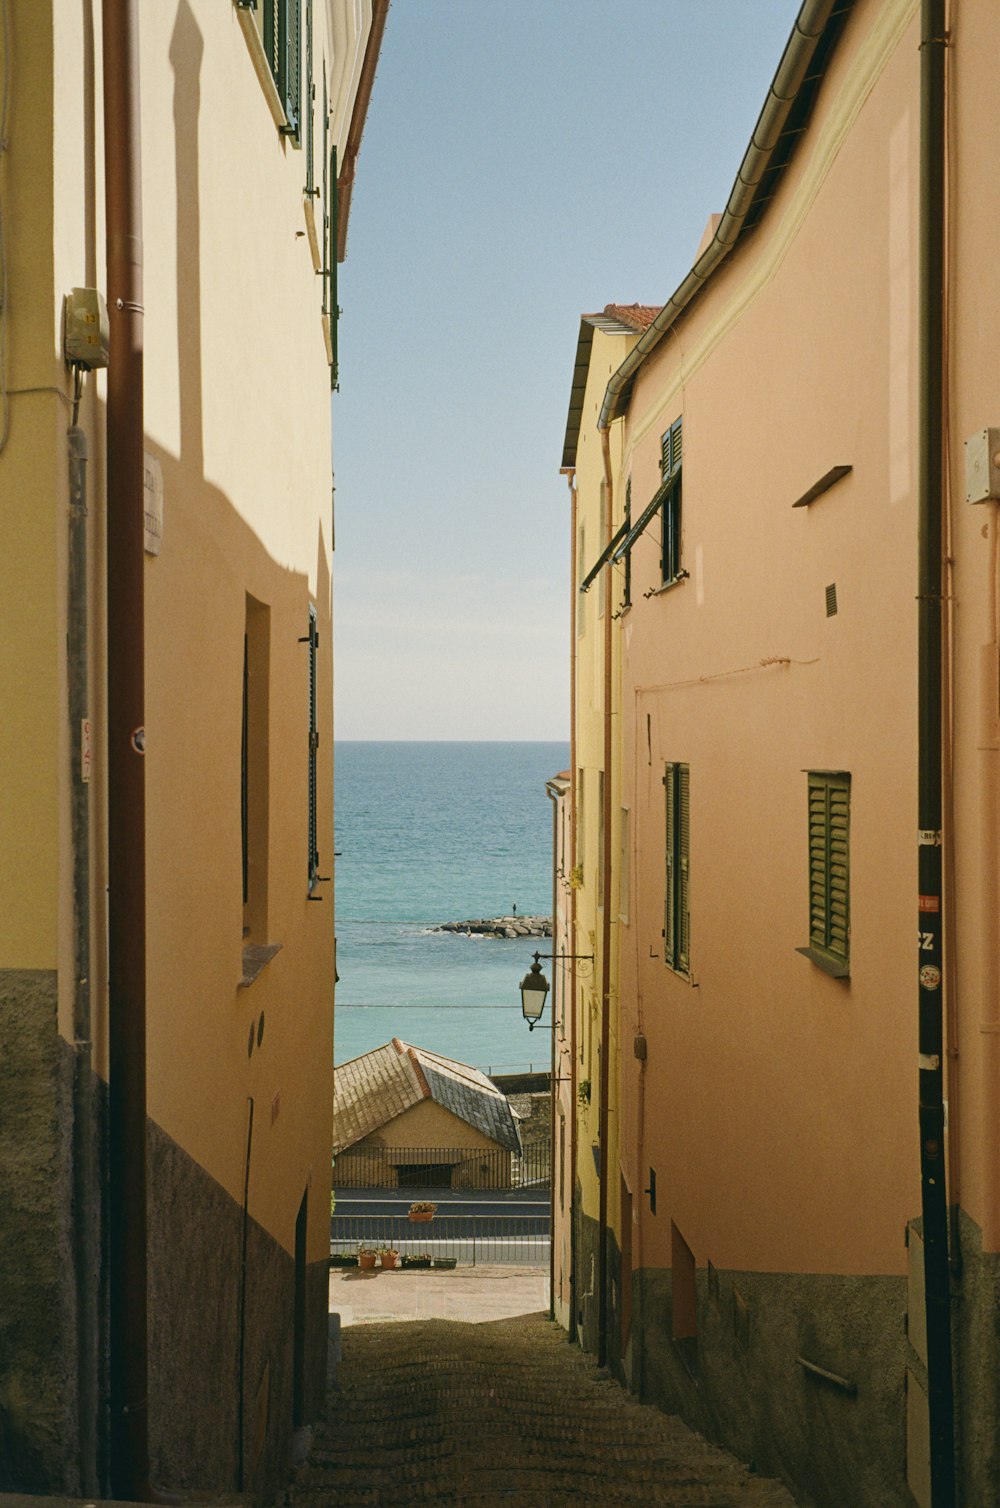 a narrow alley way with a view of the ocean